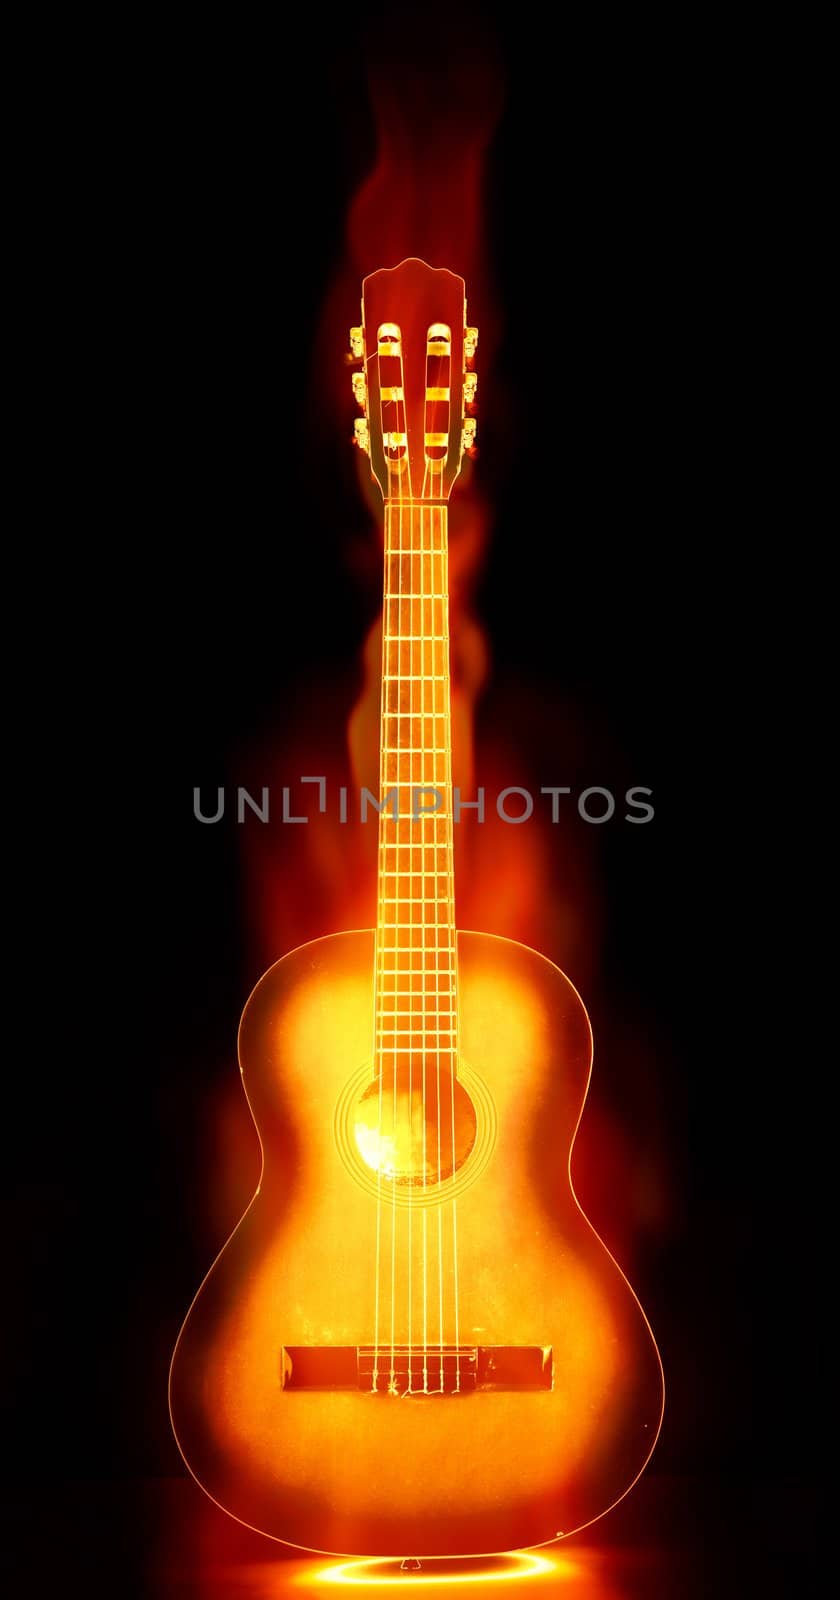 image of an acoustic guitar on fire